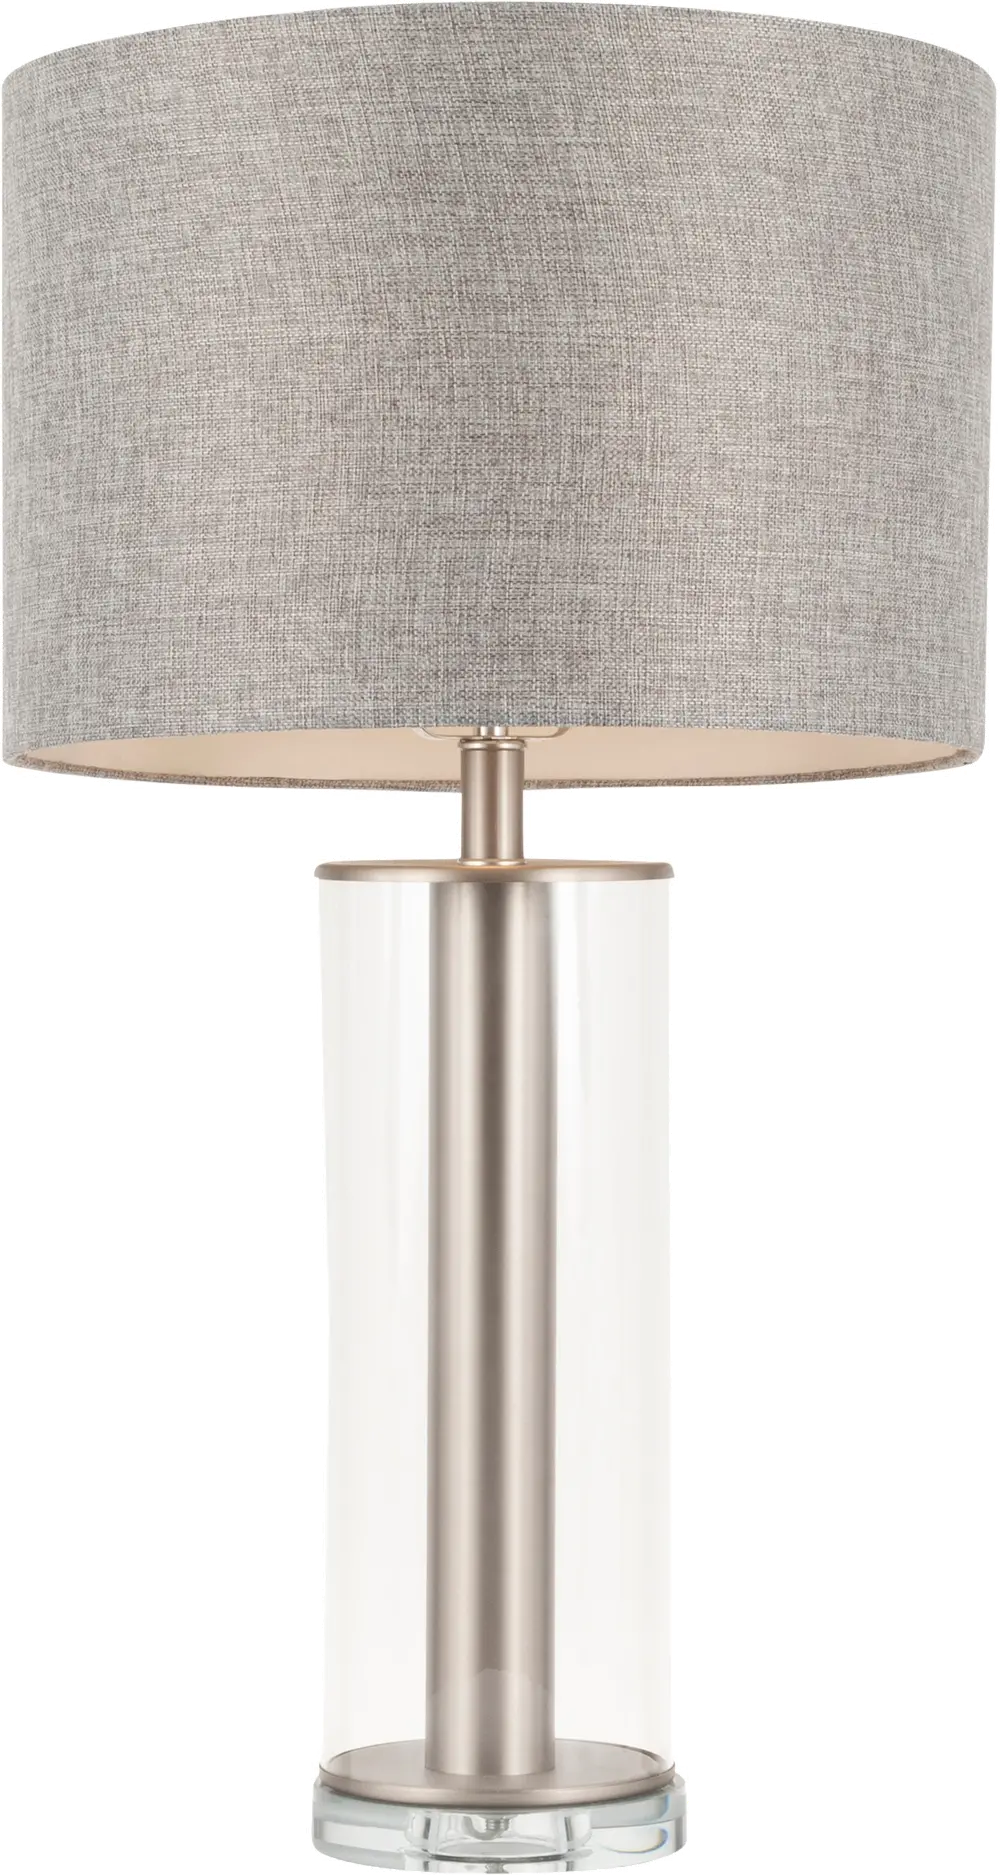 LS-GLCRTB GY Brushed Nickel Metal Table Lamp with Glass Base - Glacier-1